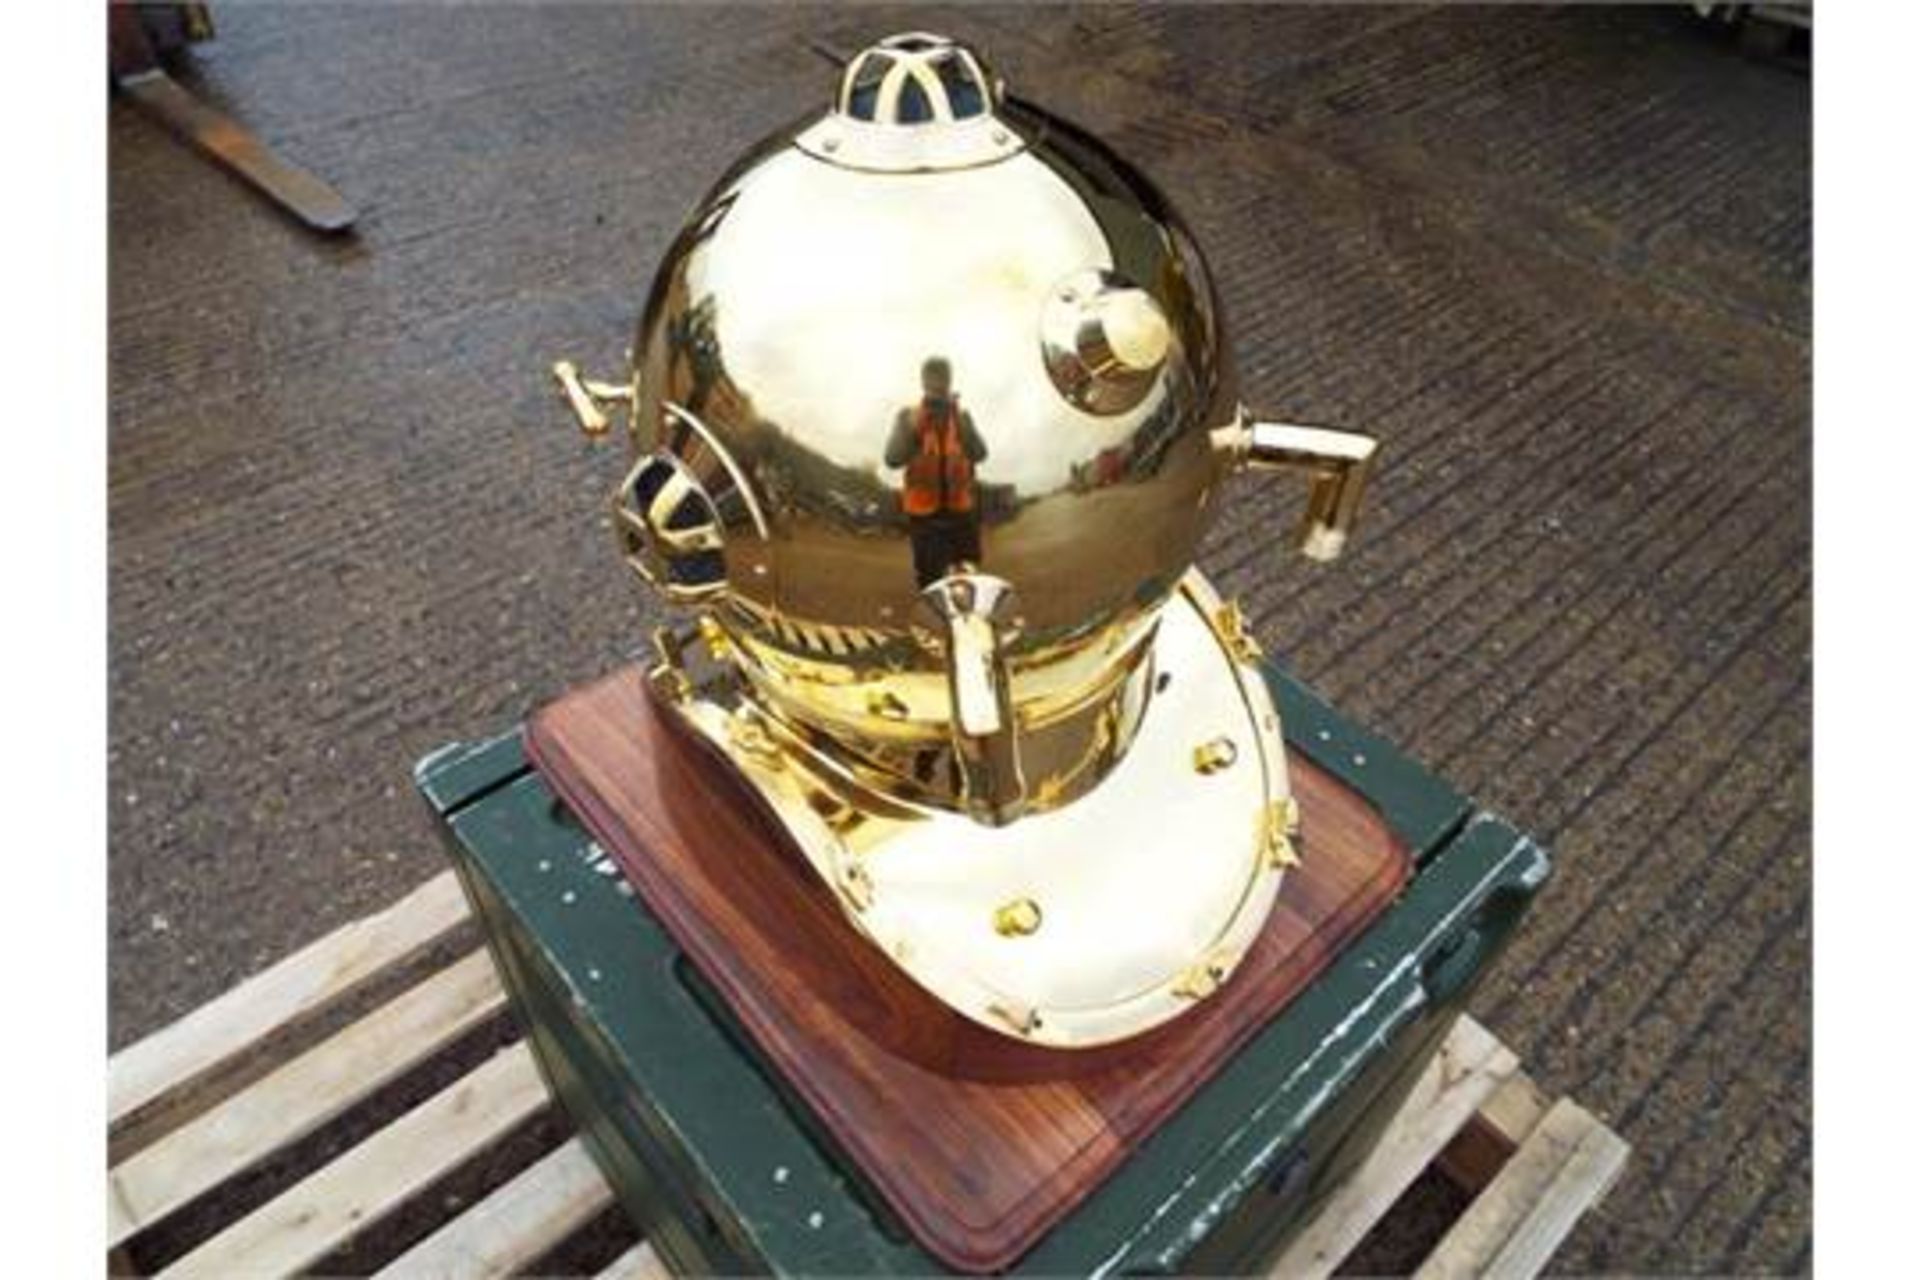 Replica Full Size U.S. Navy Mark V Brass Diving Helmet on Wooden Display Stand - Image 4 of 5